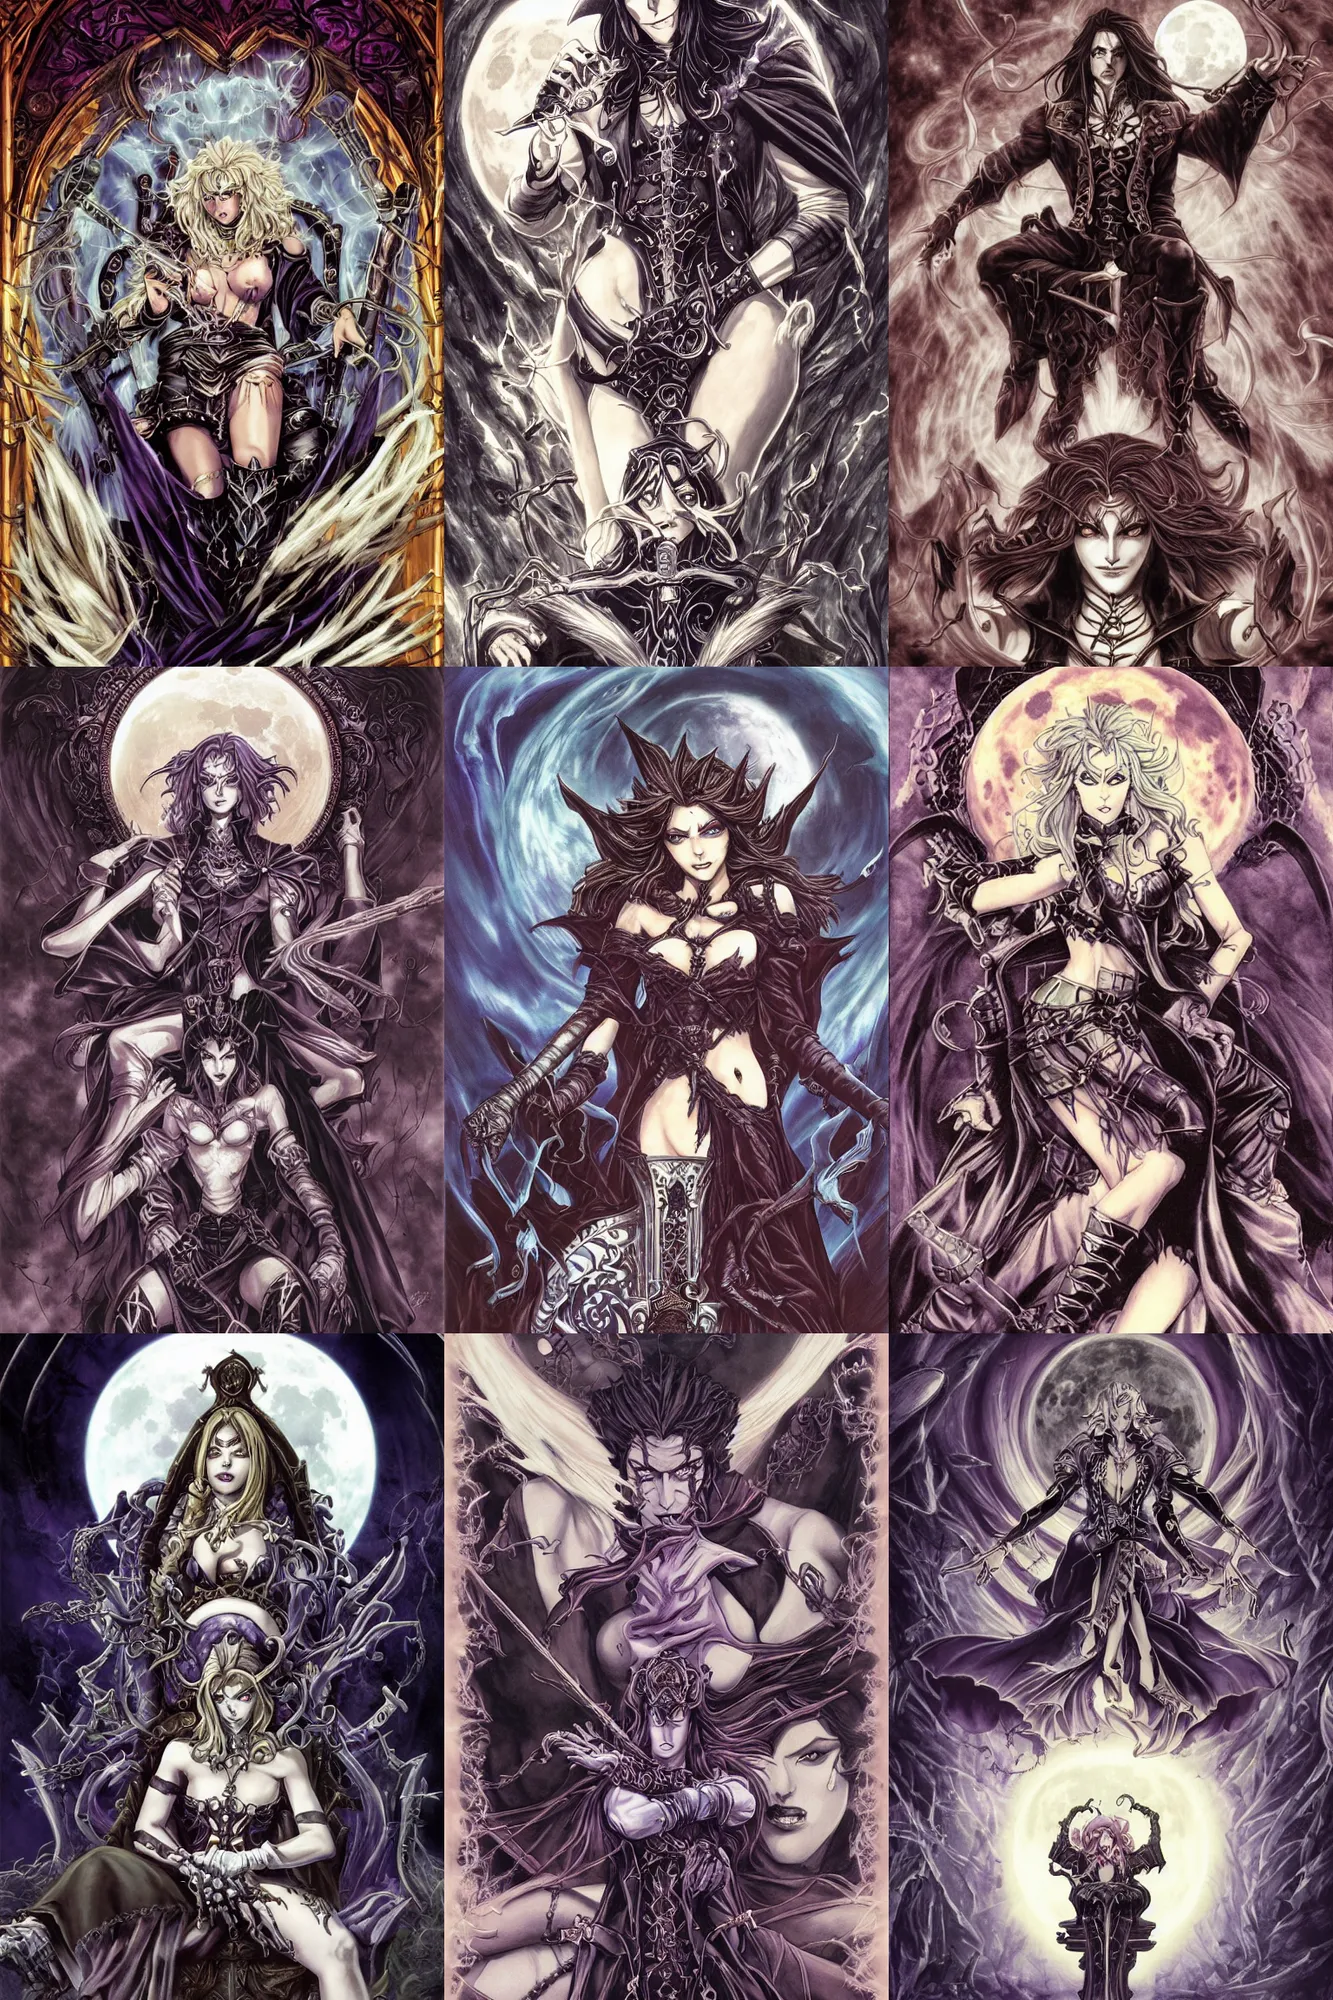 Prompt: Castlevania Witch, magic the gathering sorceress, sitting on a throne, Jojo's Bizarre Adventure Cover Art, full moon, gothic, symphony of the night, manga, highly detailed, beauty, art by Tim Burton, intricate, elegant, J. C. Leyendecker